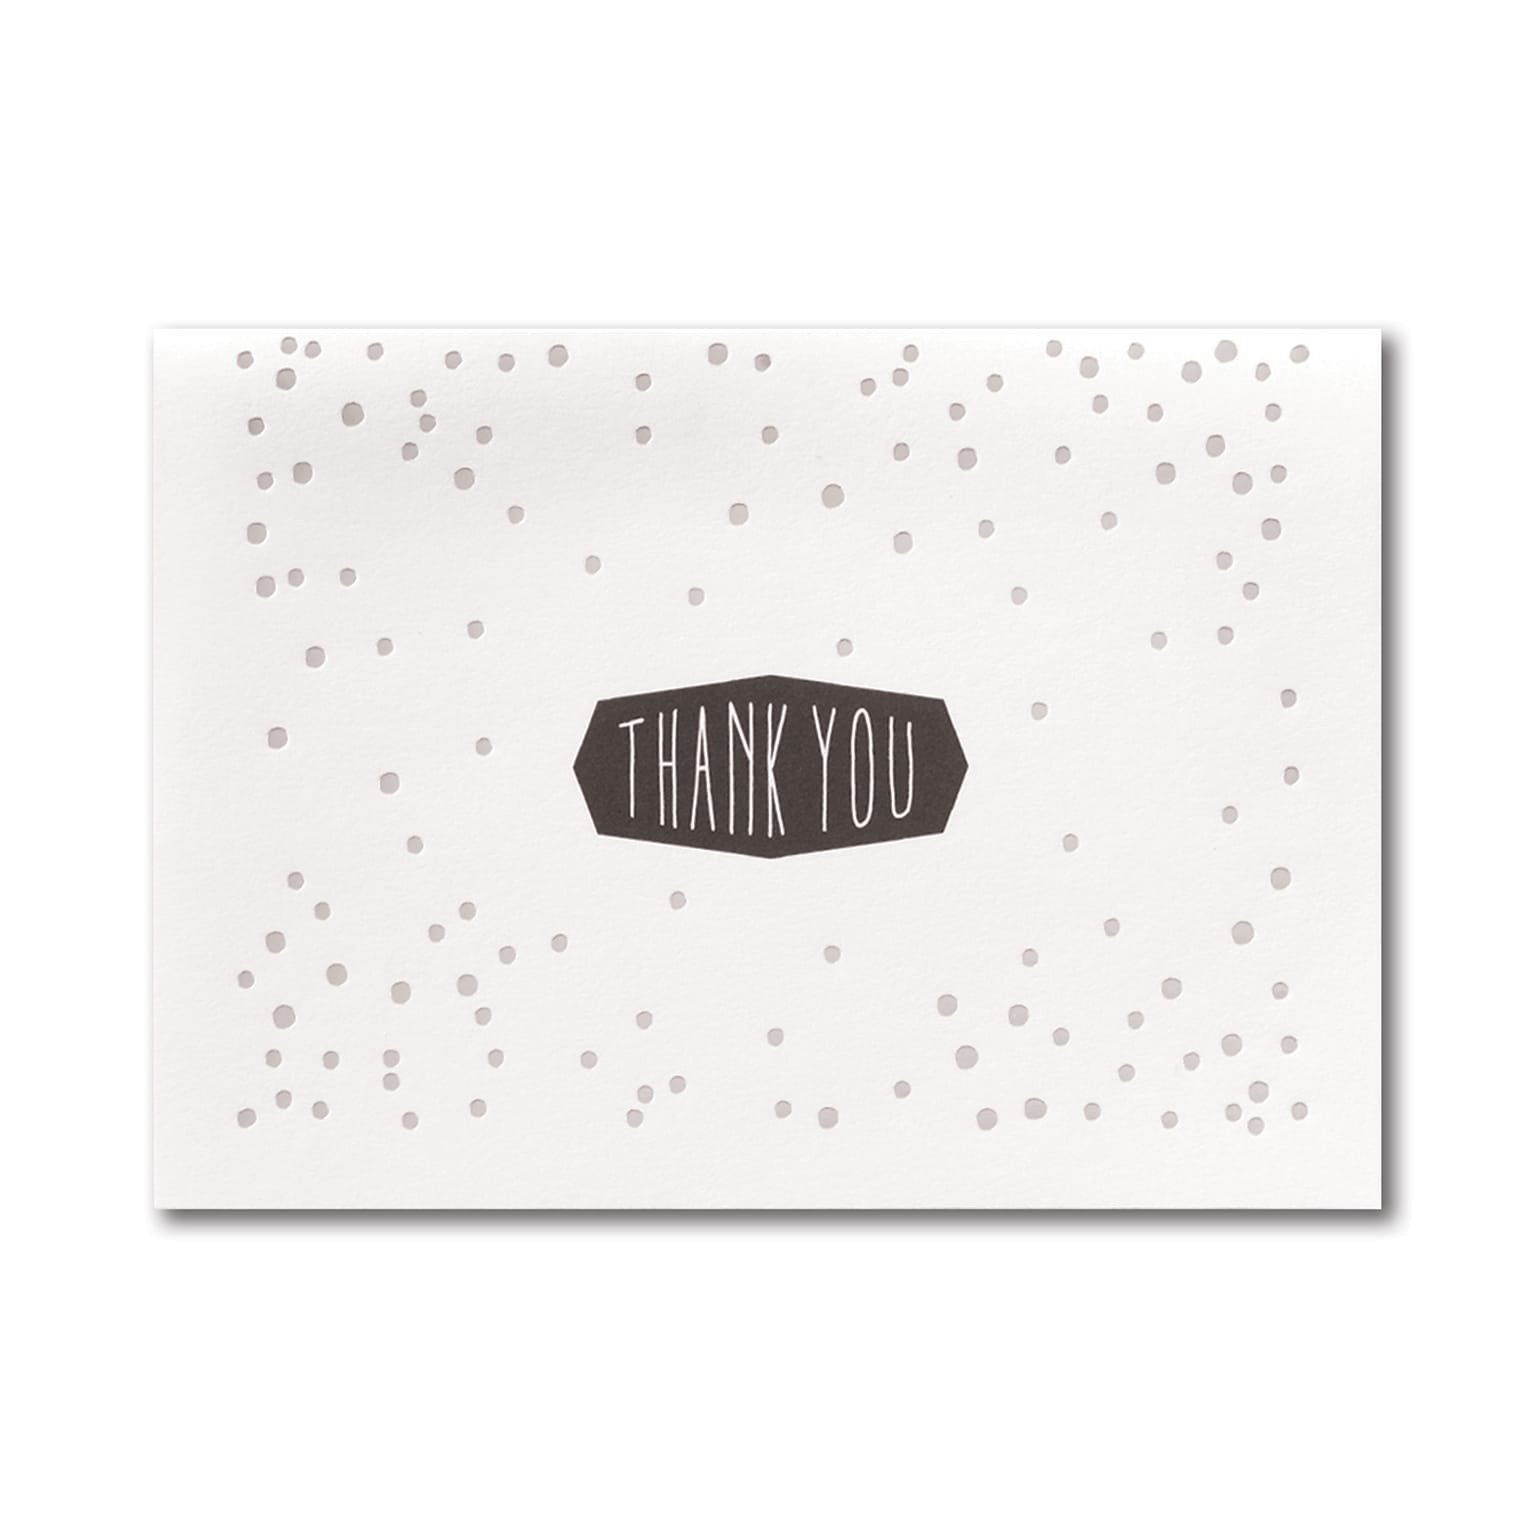 Thank You Greeting Card Assortment Pack, 4 7/8 x 3 1/2 , 50 Cards with Envelopes